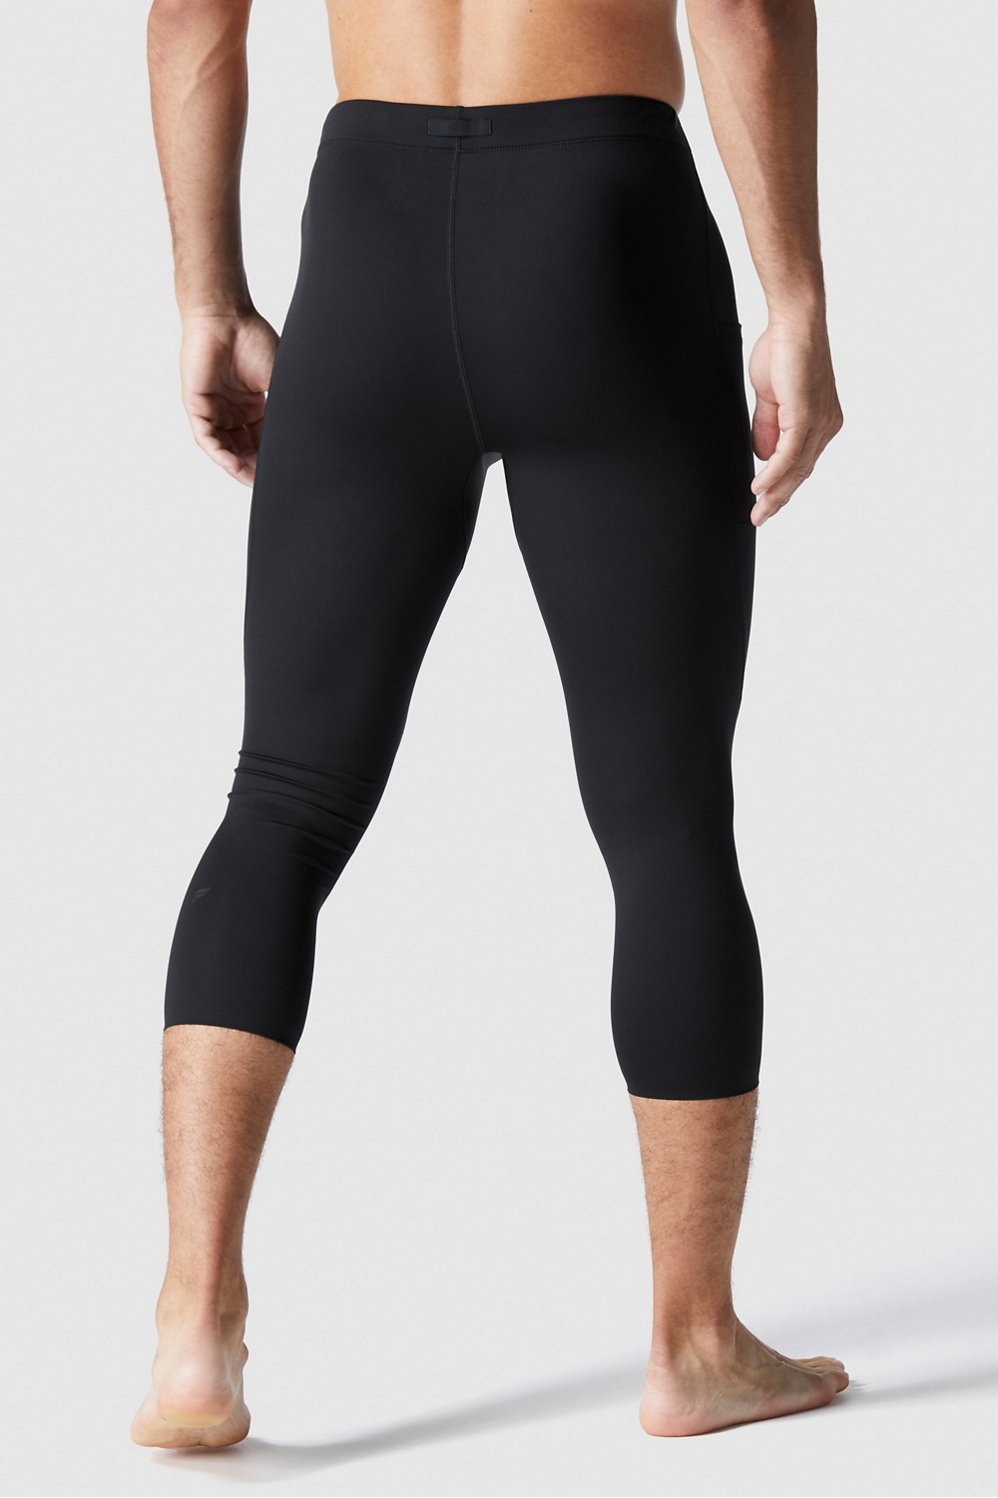 The Baseline Tight 3/4 - Fabletics